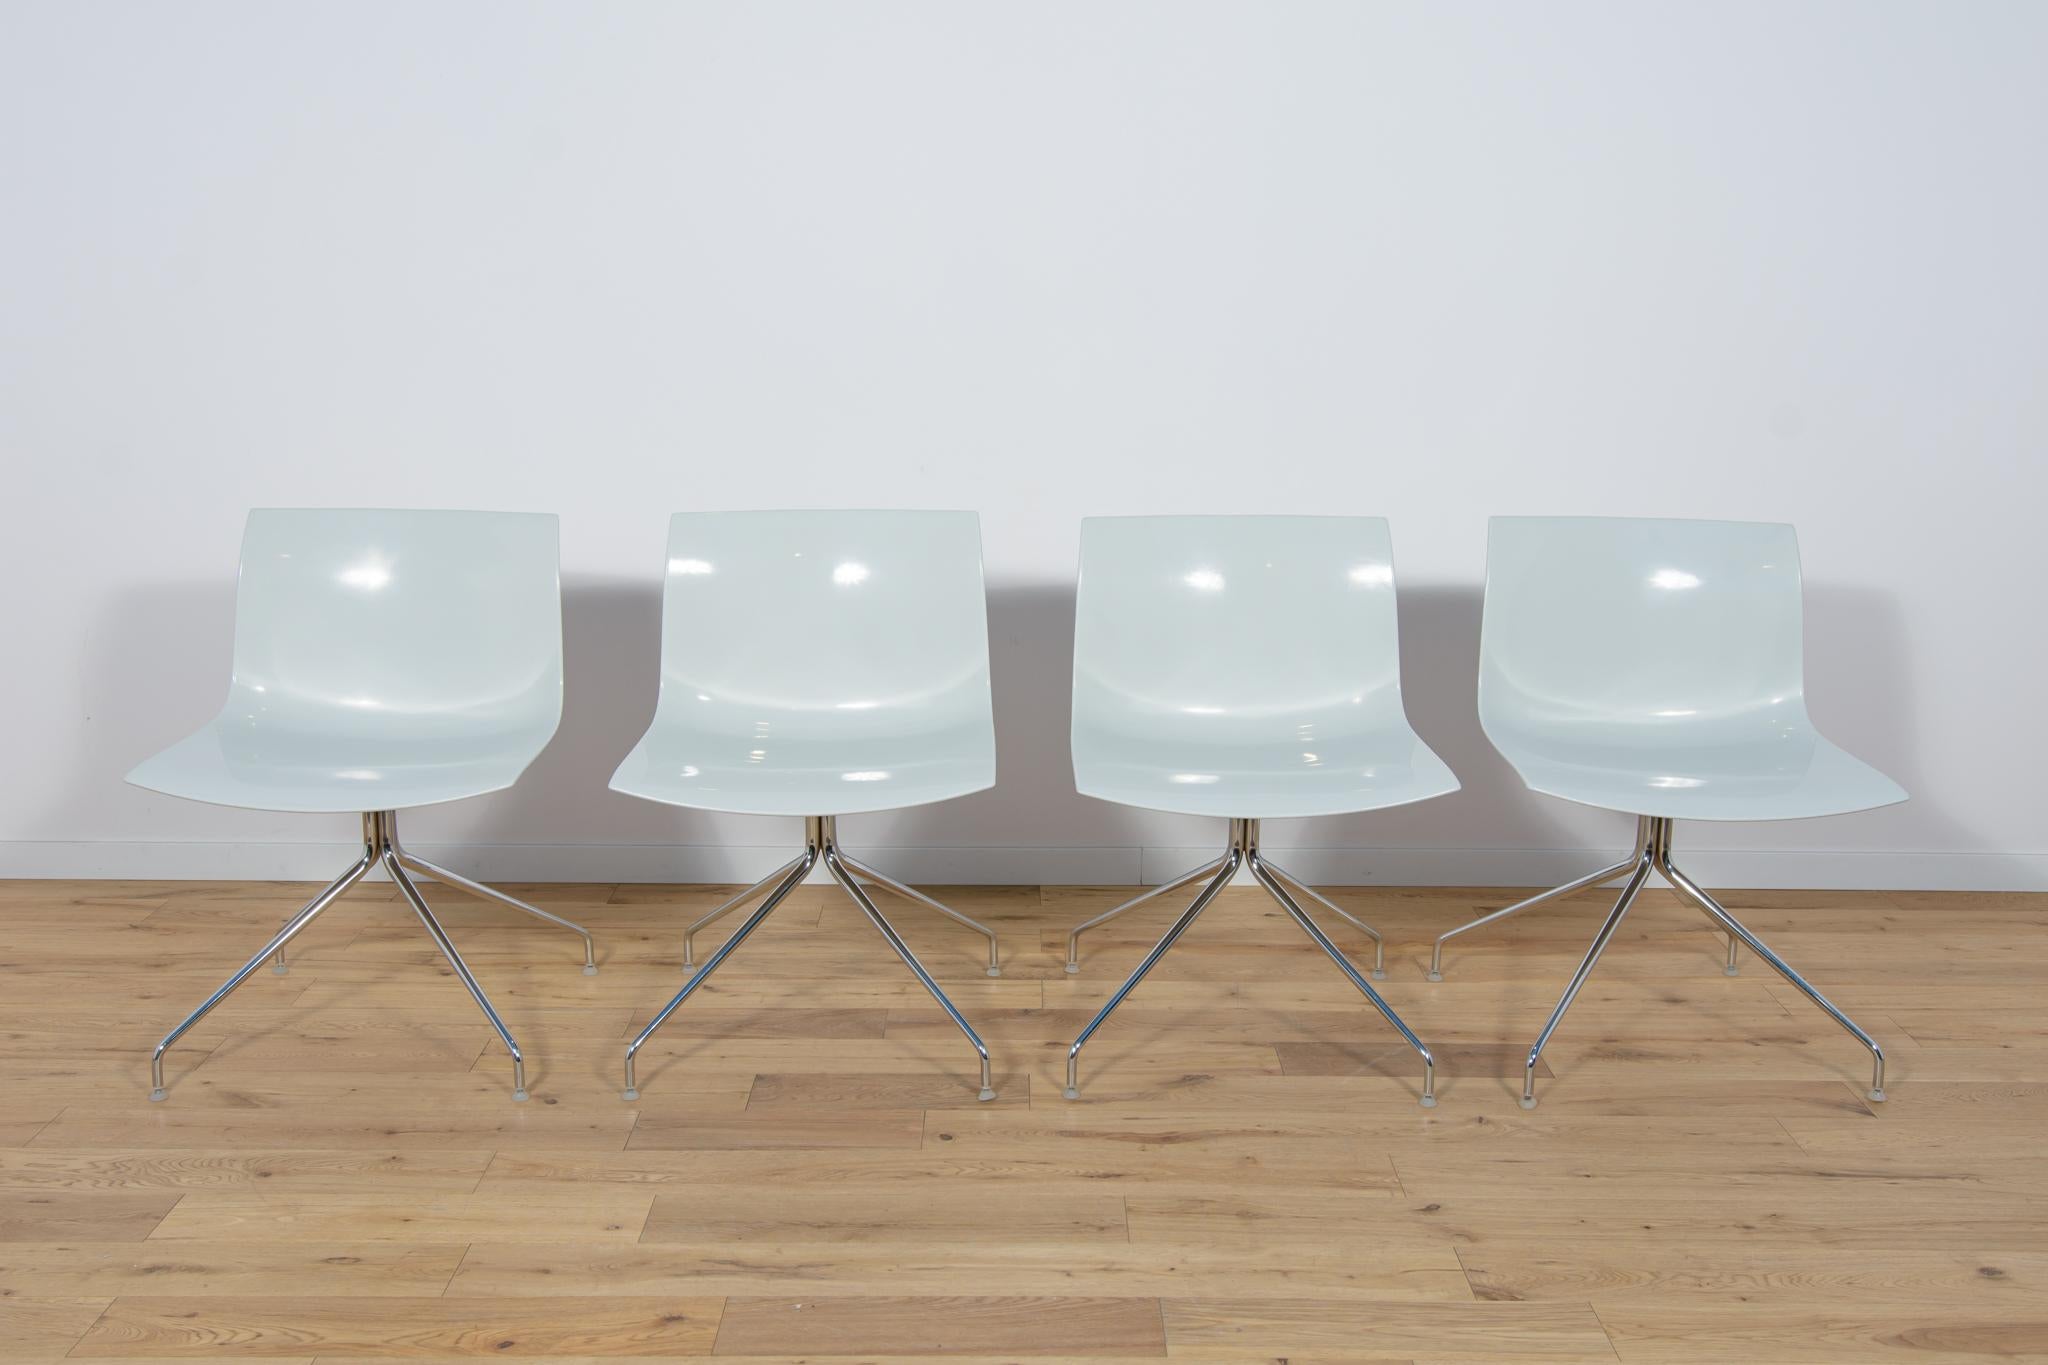 Chairs were designed by Lievore Altherr Molina, produced by Arper at the beginning of the 21st century in Italy. The armchairs have chrome swivel legs. Chrome elements have been polished. Ergonomic seats made of strong plastic. The chairs have